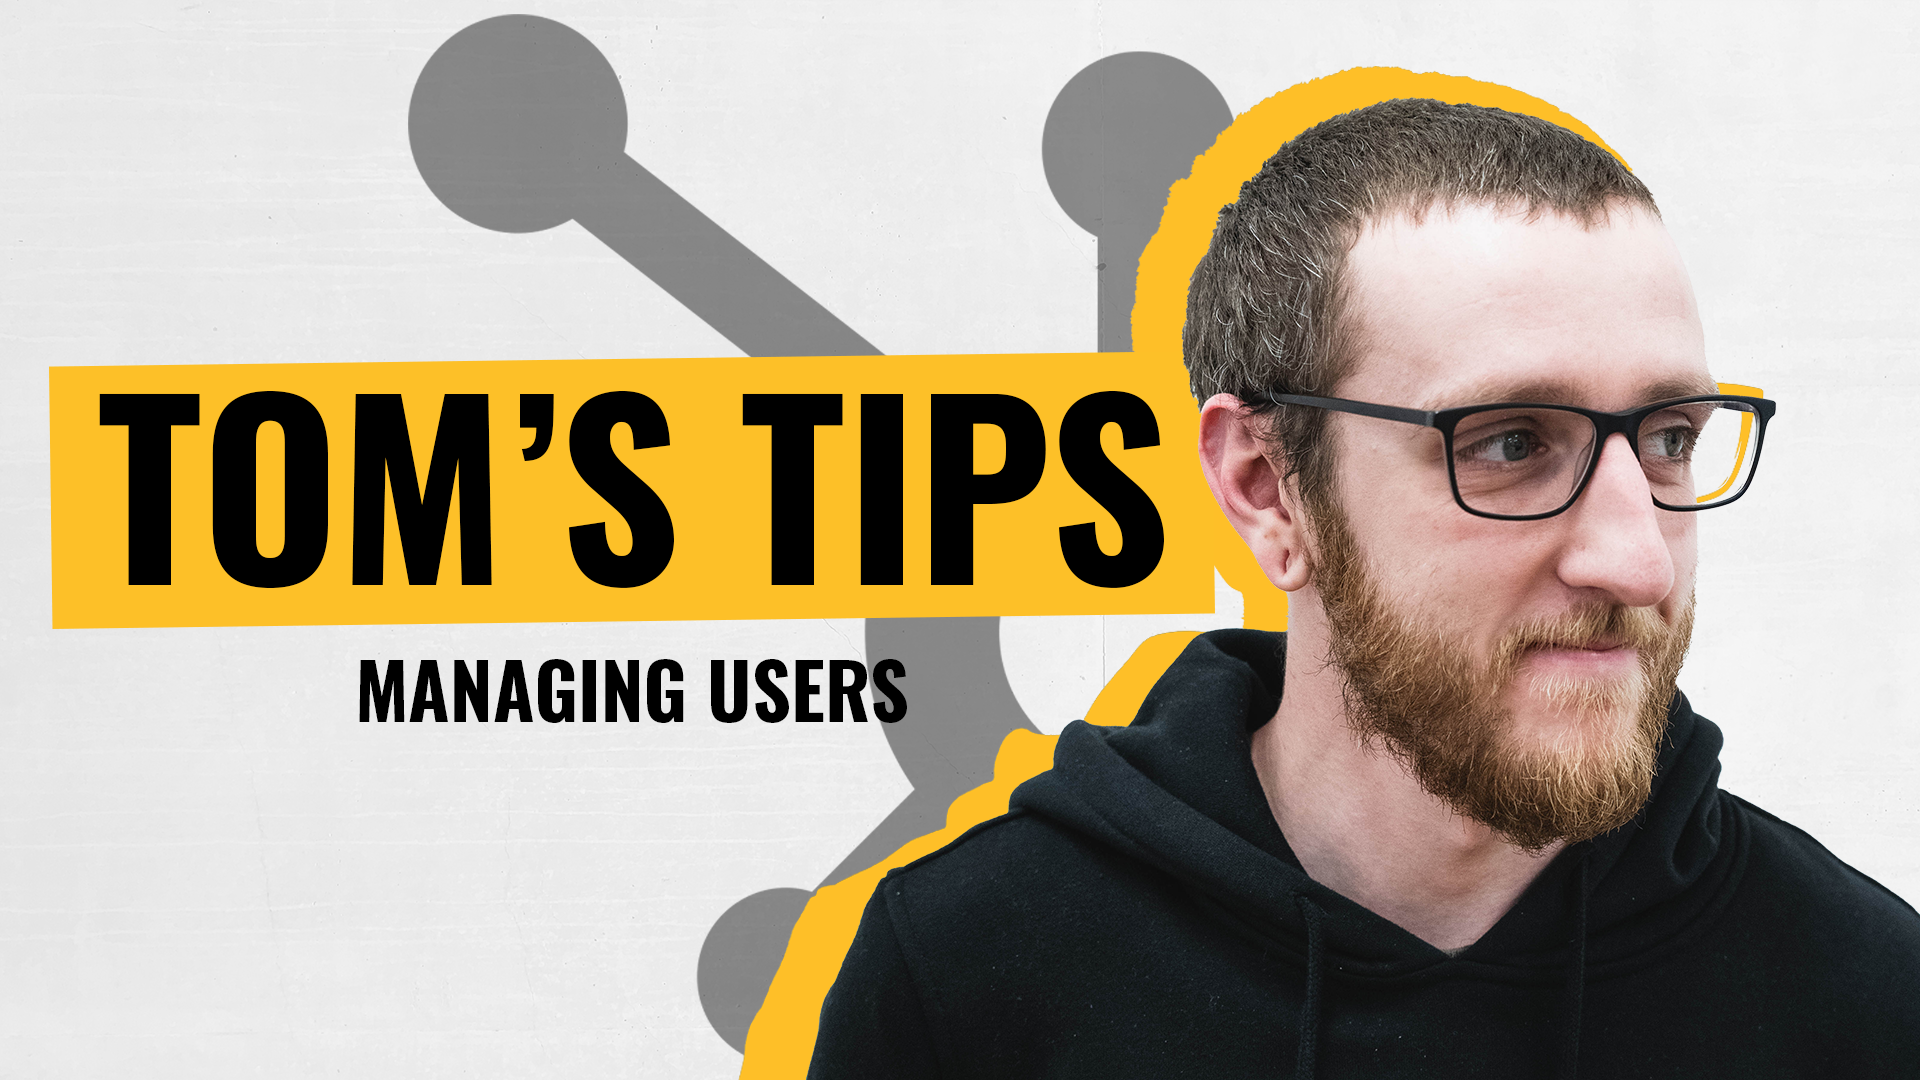 [Video] Tom's Tips - S1 E6- How do I manage users on HubSpot?